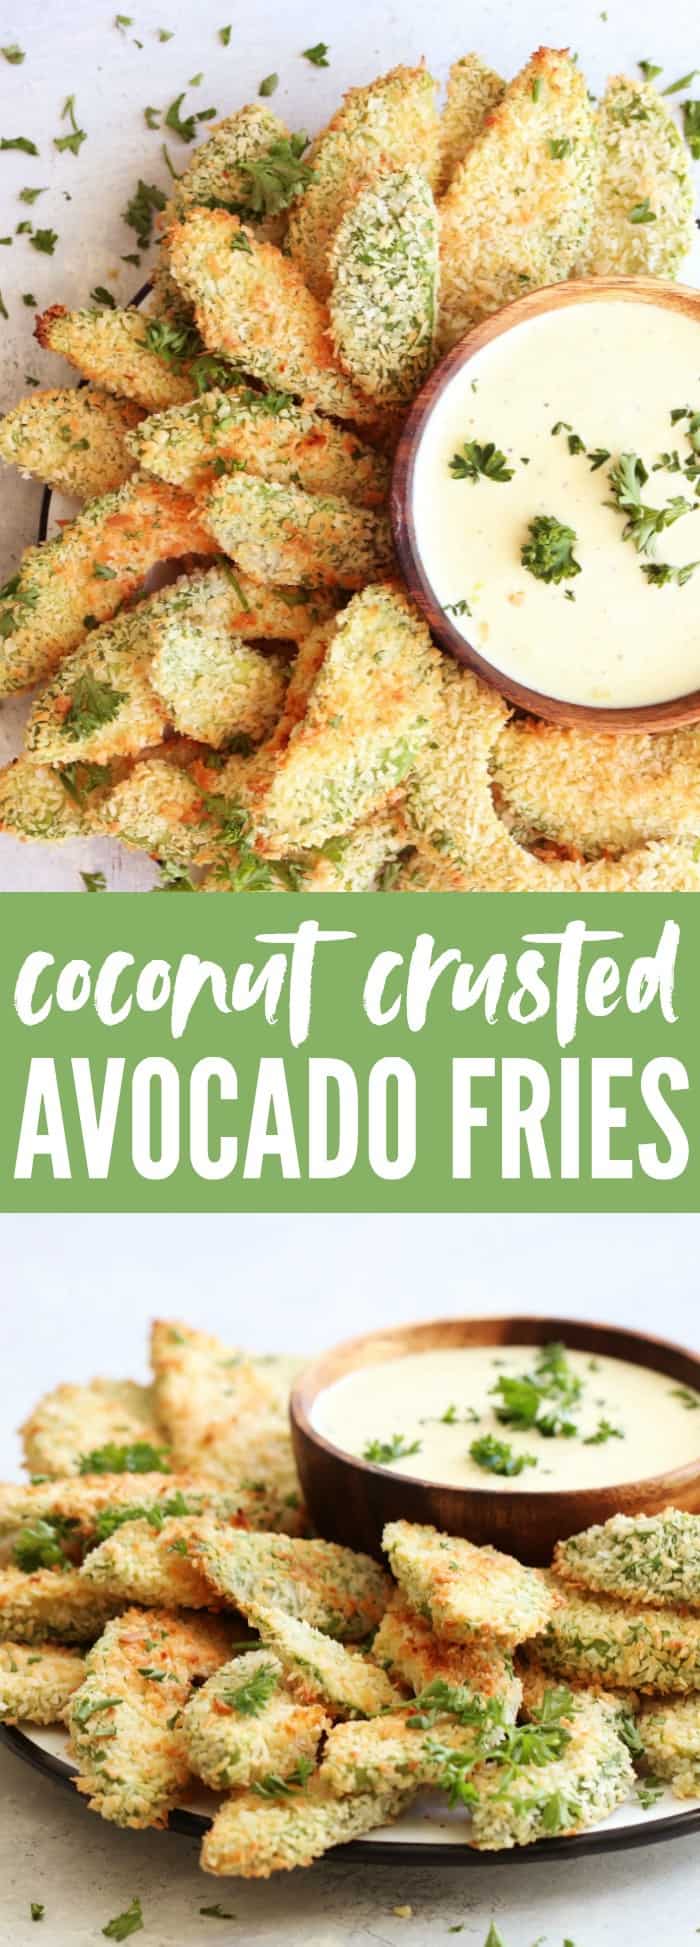 These Coconut Crusted Avocado Fries are such a fun and unexpected appetizer! Perfect gluten free and low carb recipe for your next party! thetoastedpinenut.com #glutenfree #paleo #healthy #lowcarb #appetizer